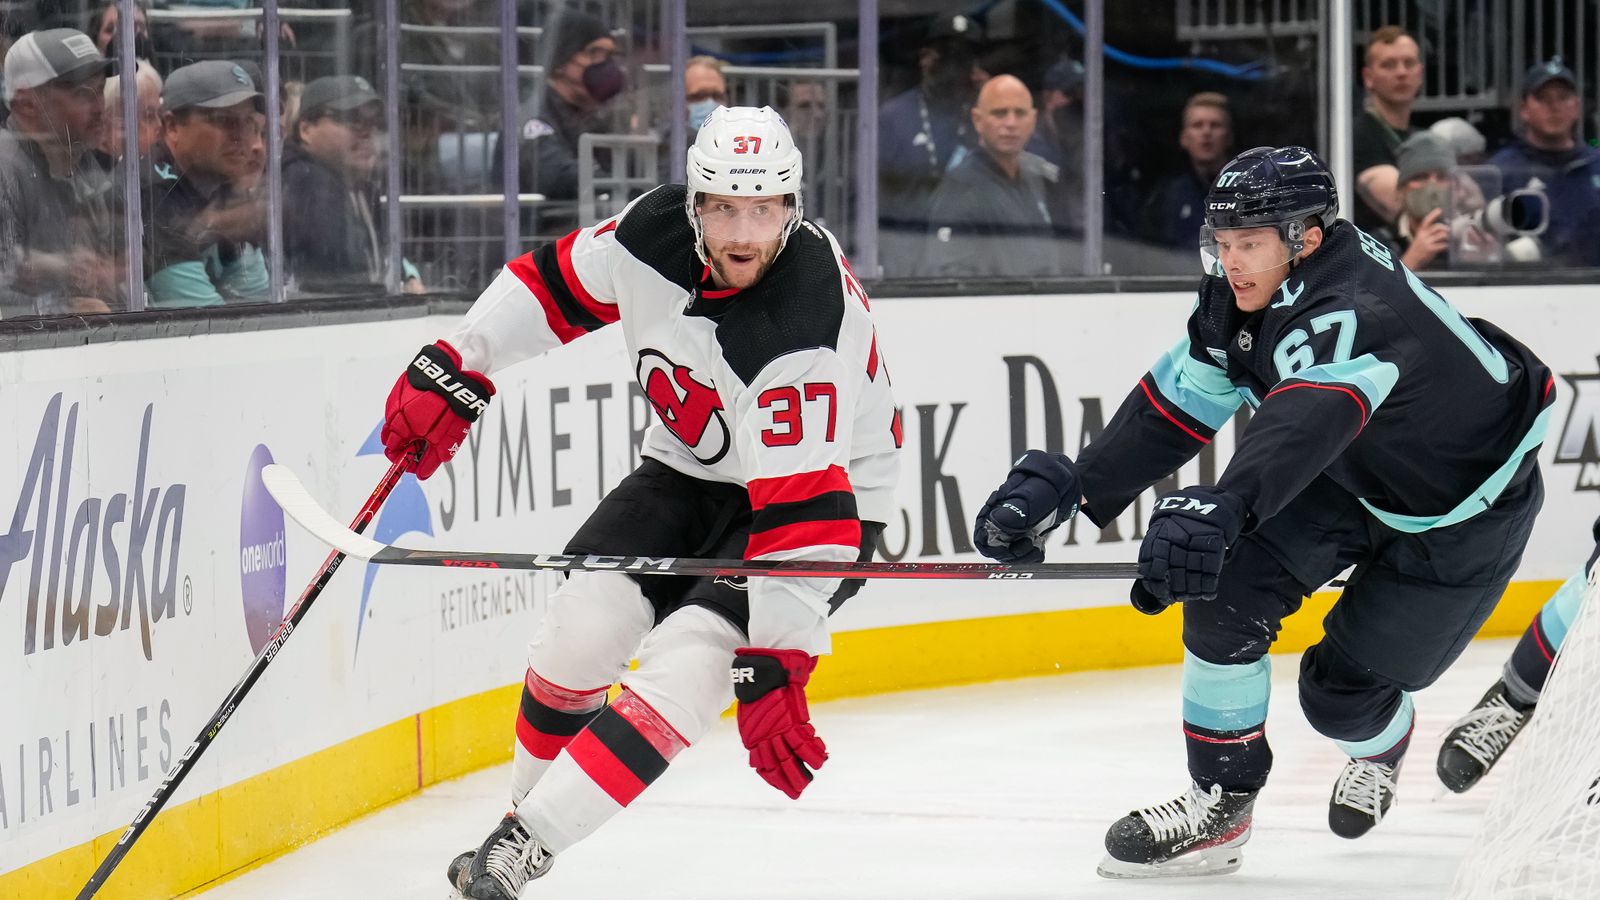 New Jersey Devils: Hopefully Brian Boyle Can Return For His Night